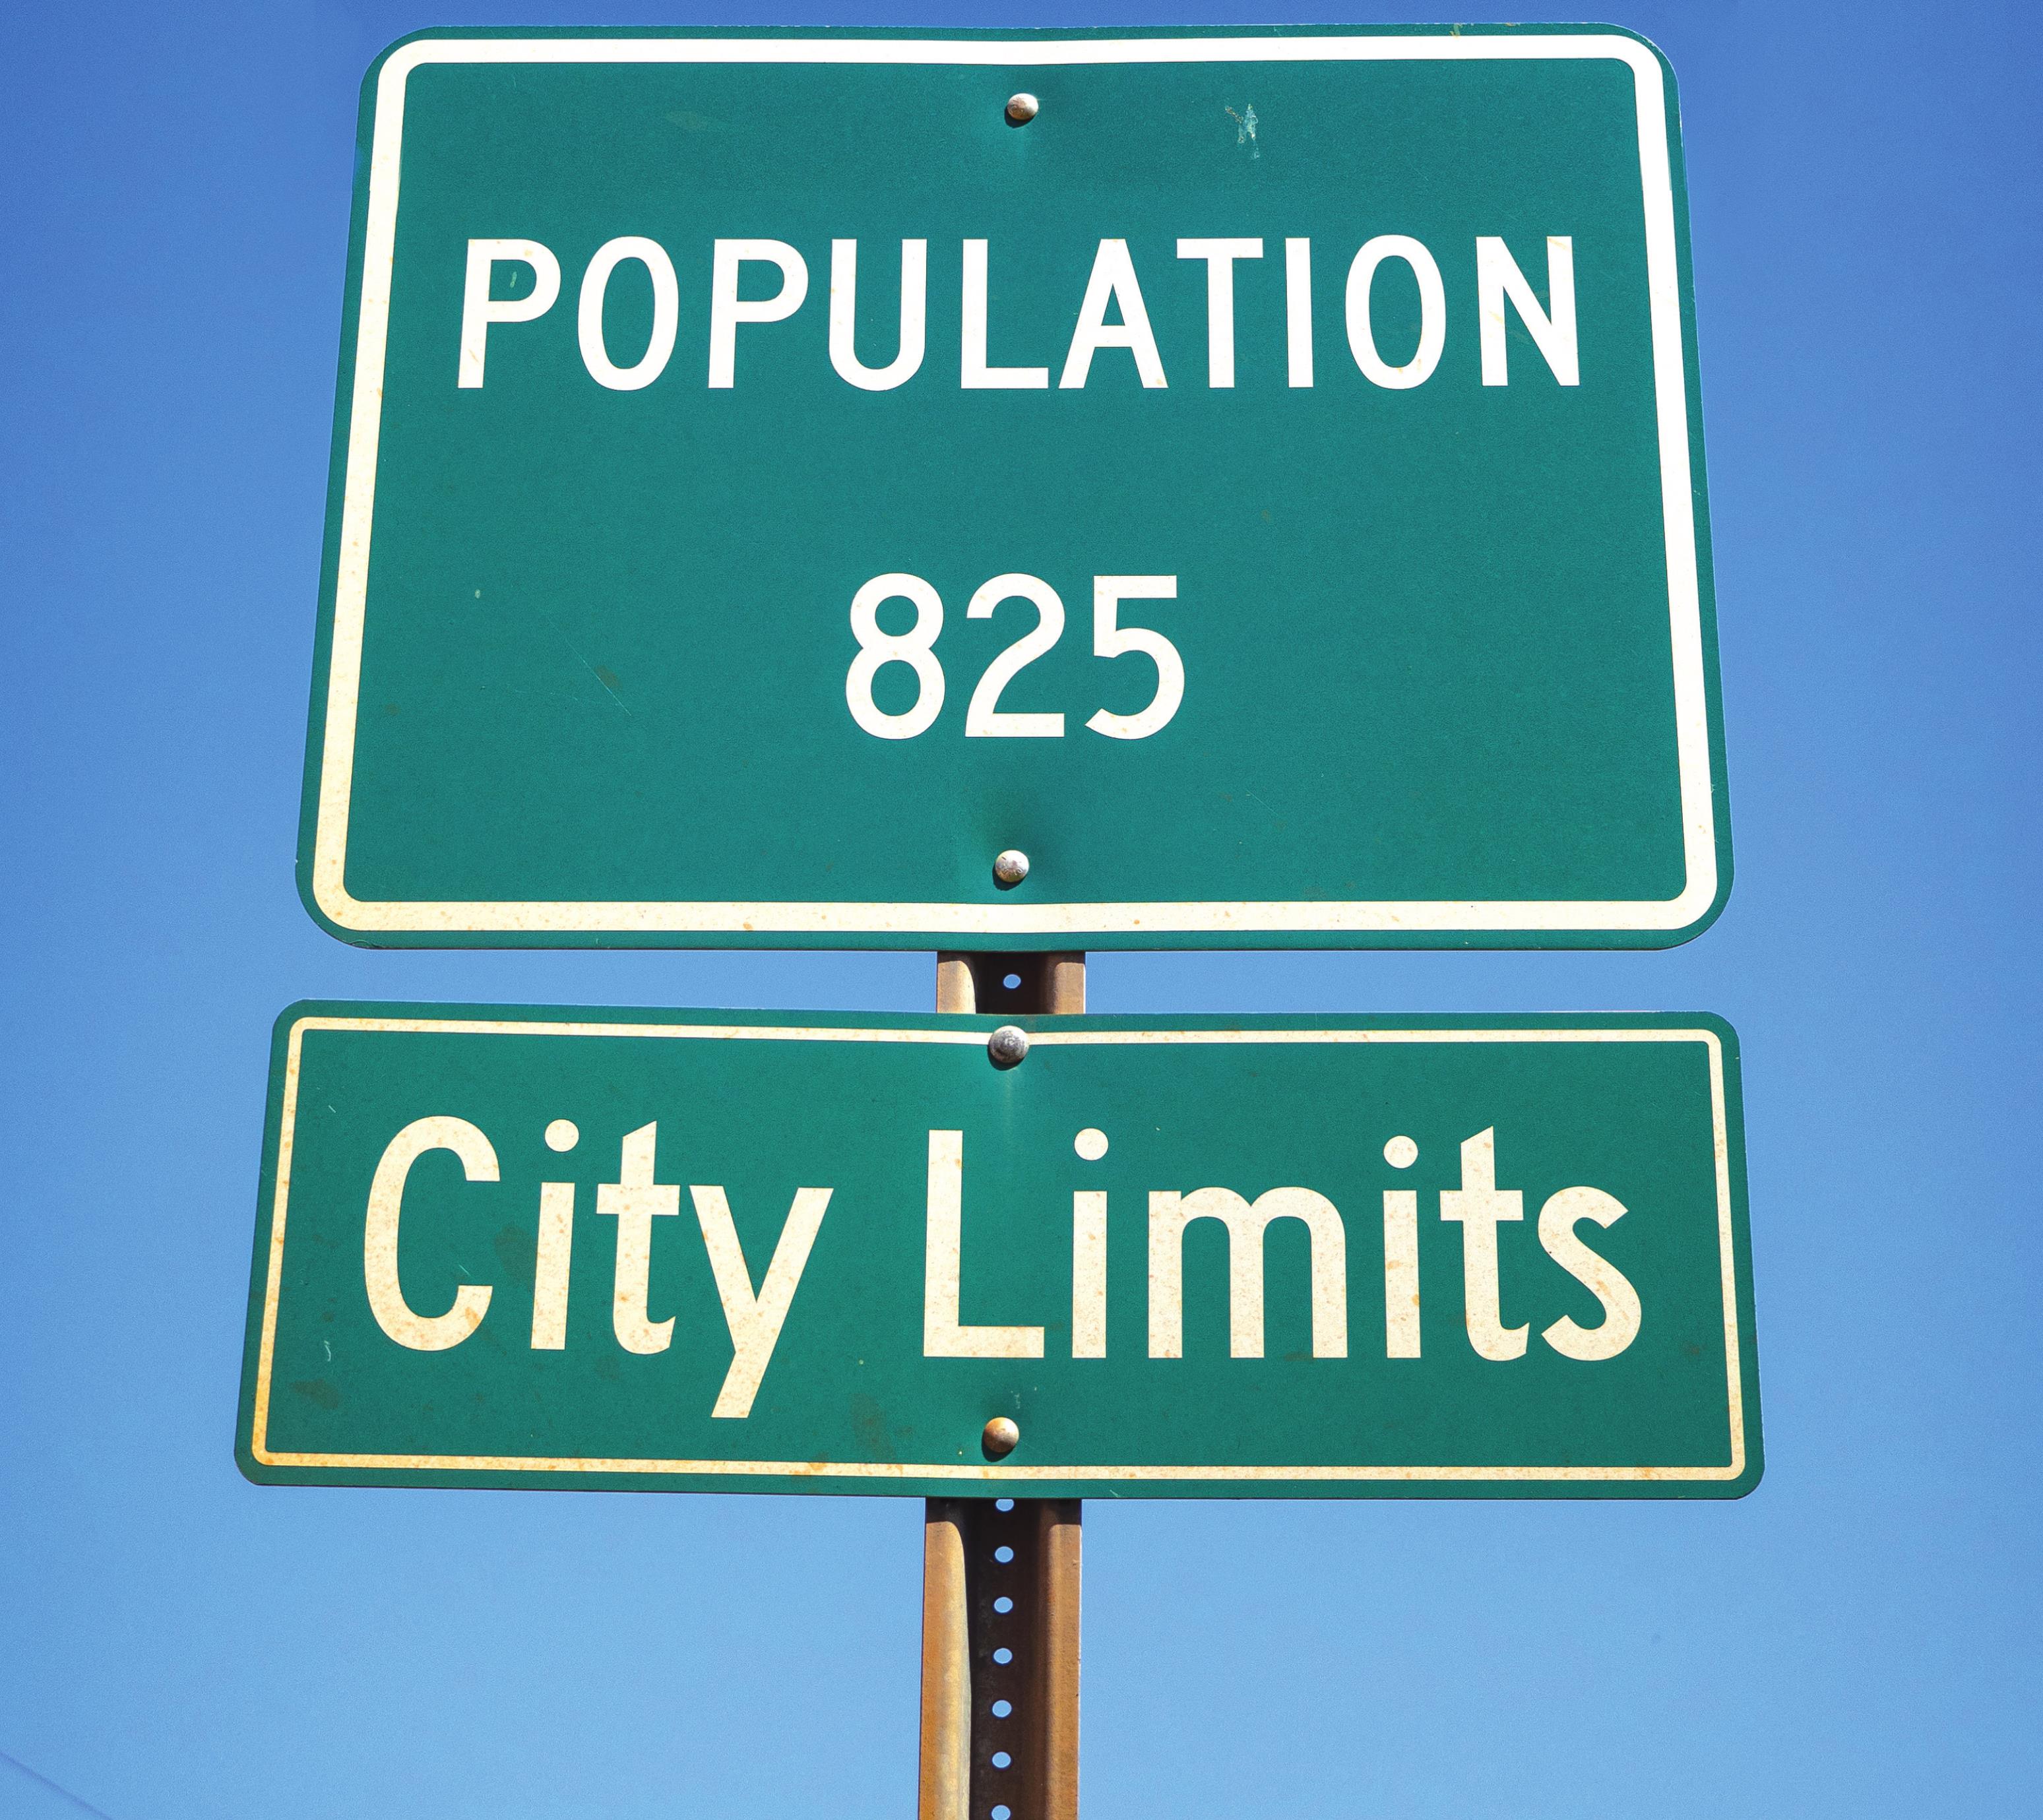 Updated town population signs are a rare sight anymore in rural Oklahoma. New head counts across the state are now being tallied for the U.S. Census. Provided